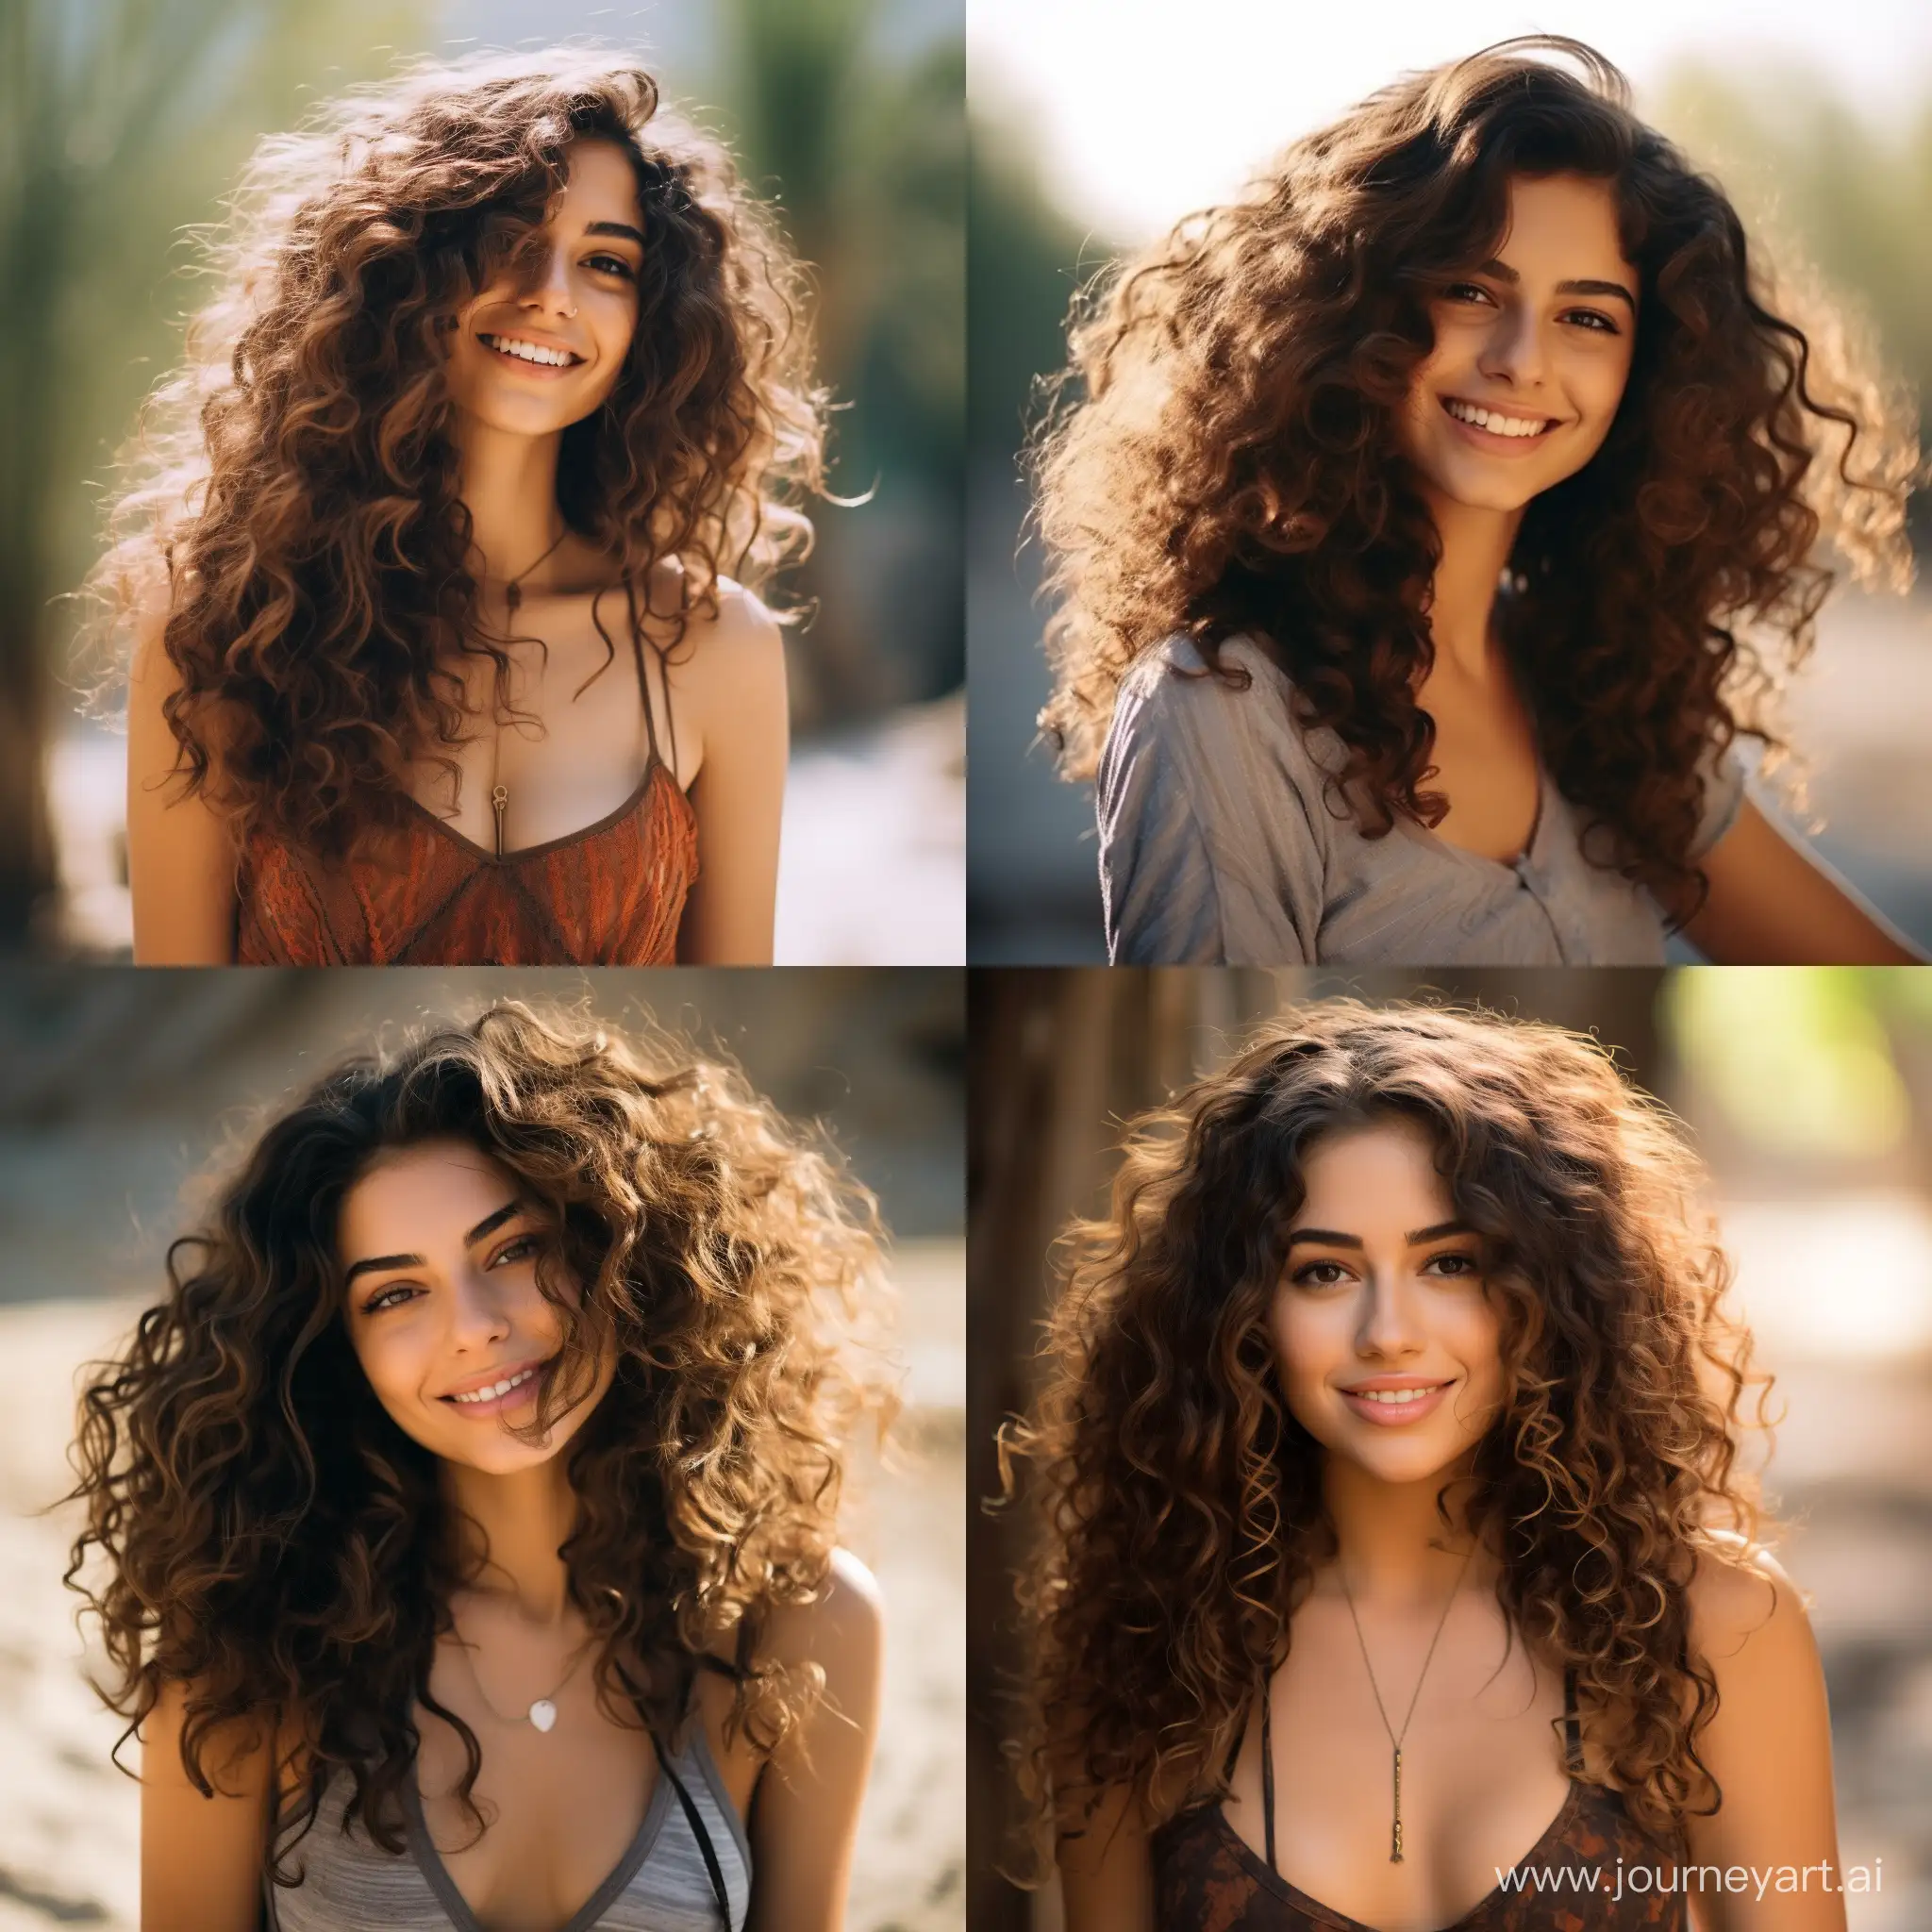 Radiant-Iranian-Woman-with-Curly-Hair-and-Joyful-Smile